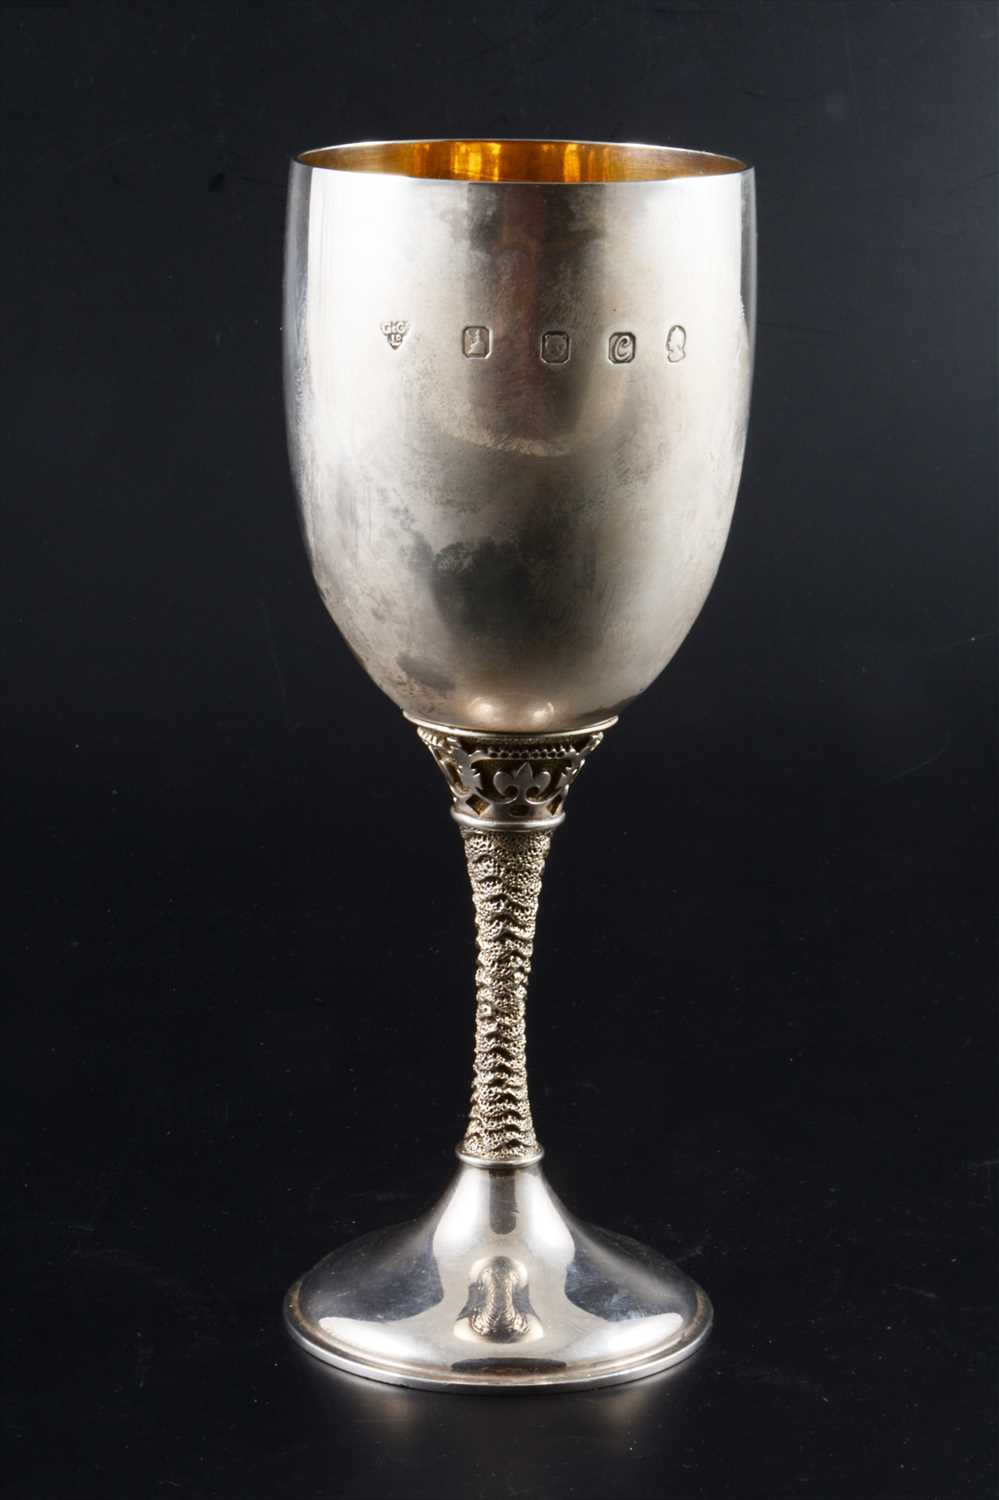 Lot 193 - A modern silver goblet, designed by Anthony Elson, Garrard & Co, London, 1977.